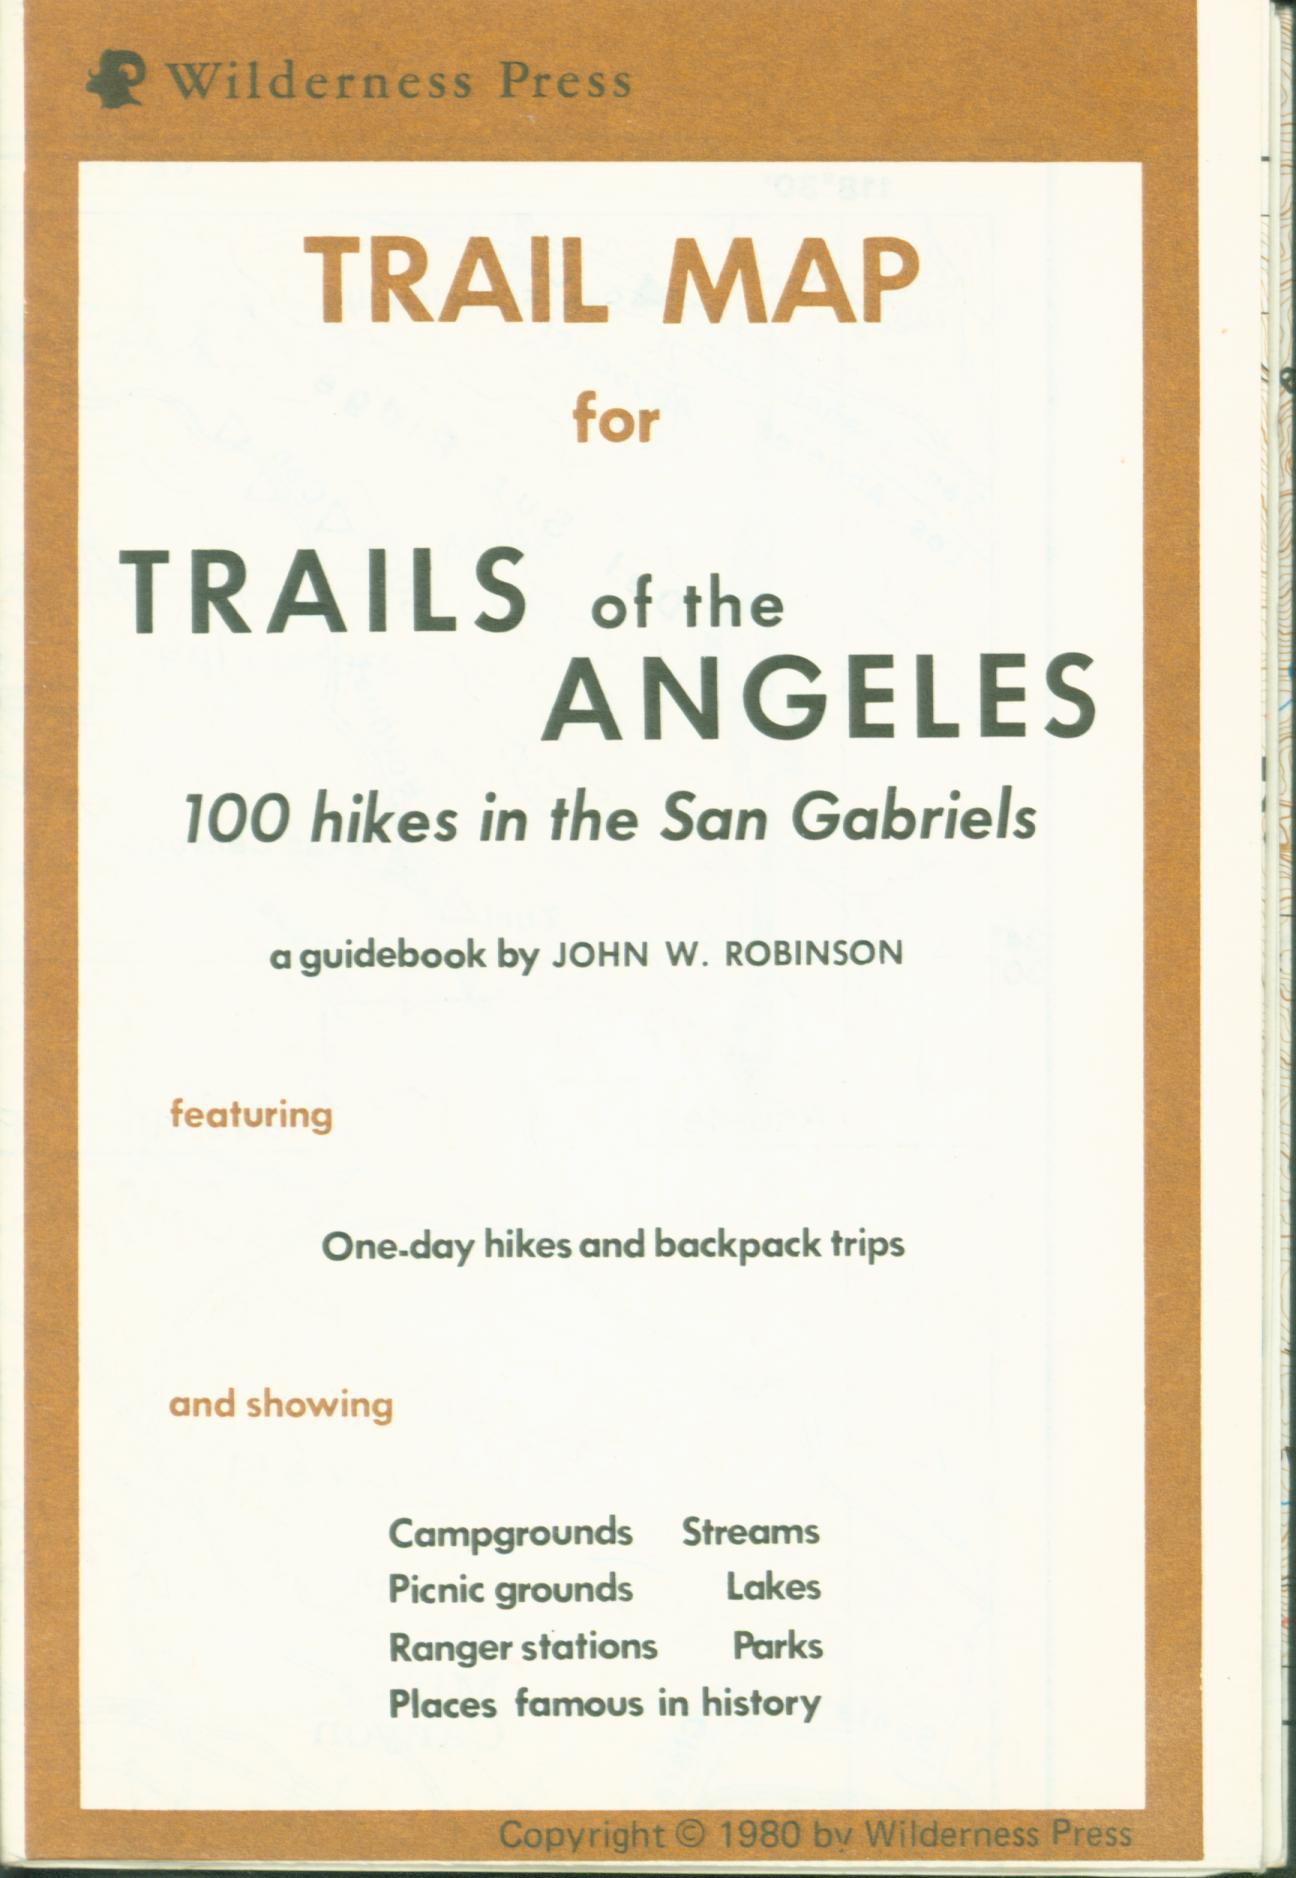 TRAILS OF THE ANGELES MAP: 100 hikes in the San Gabriels.